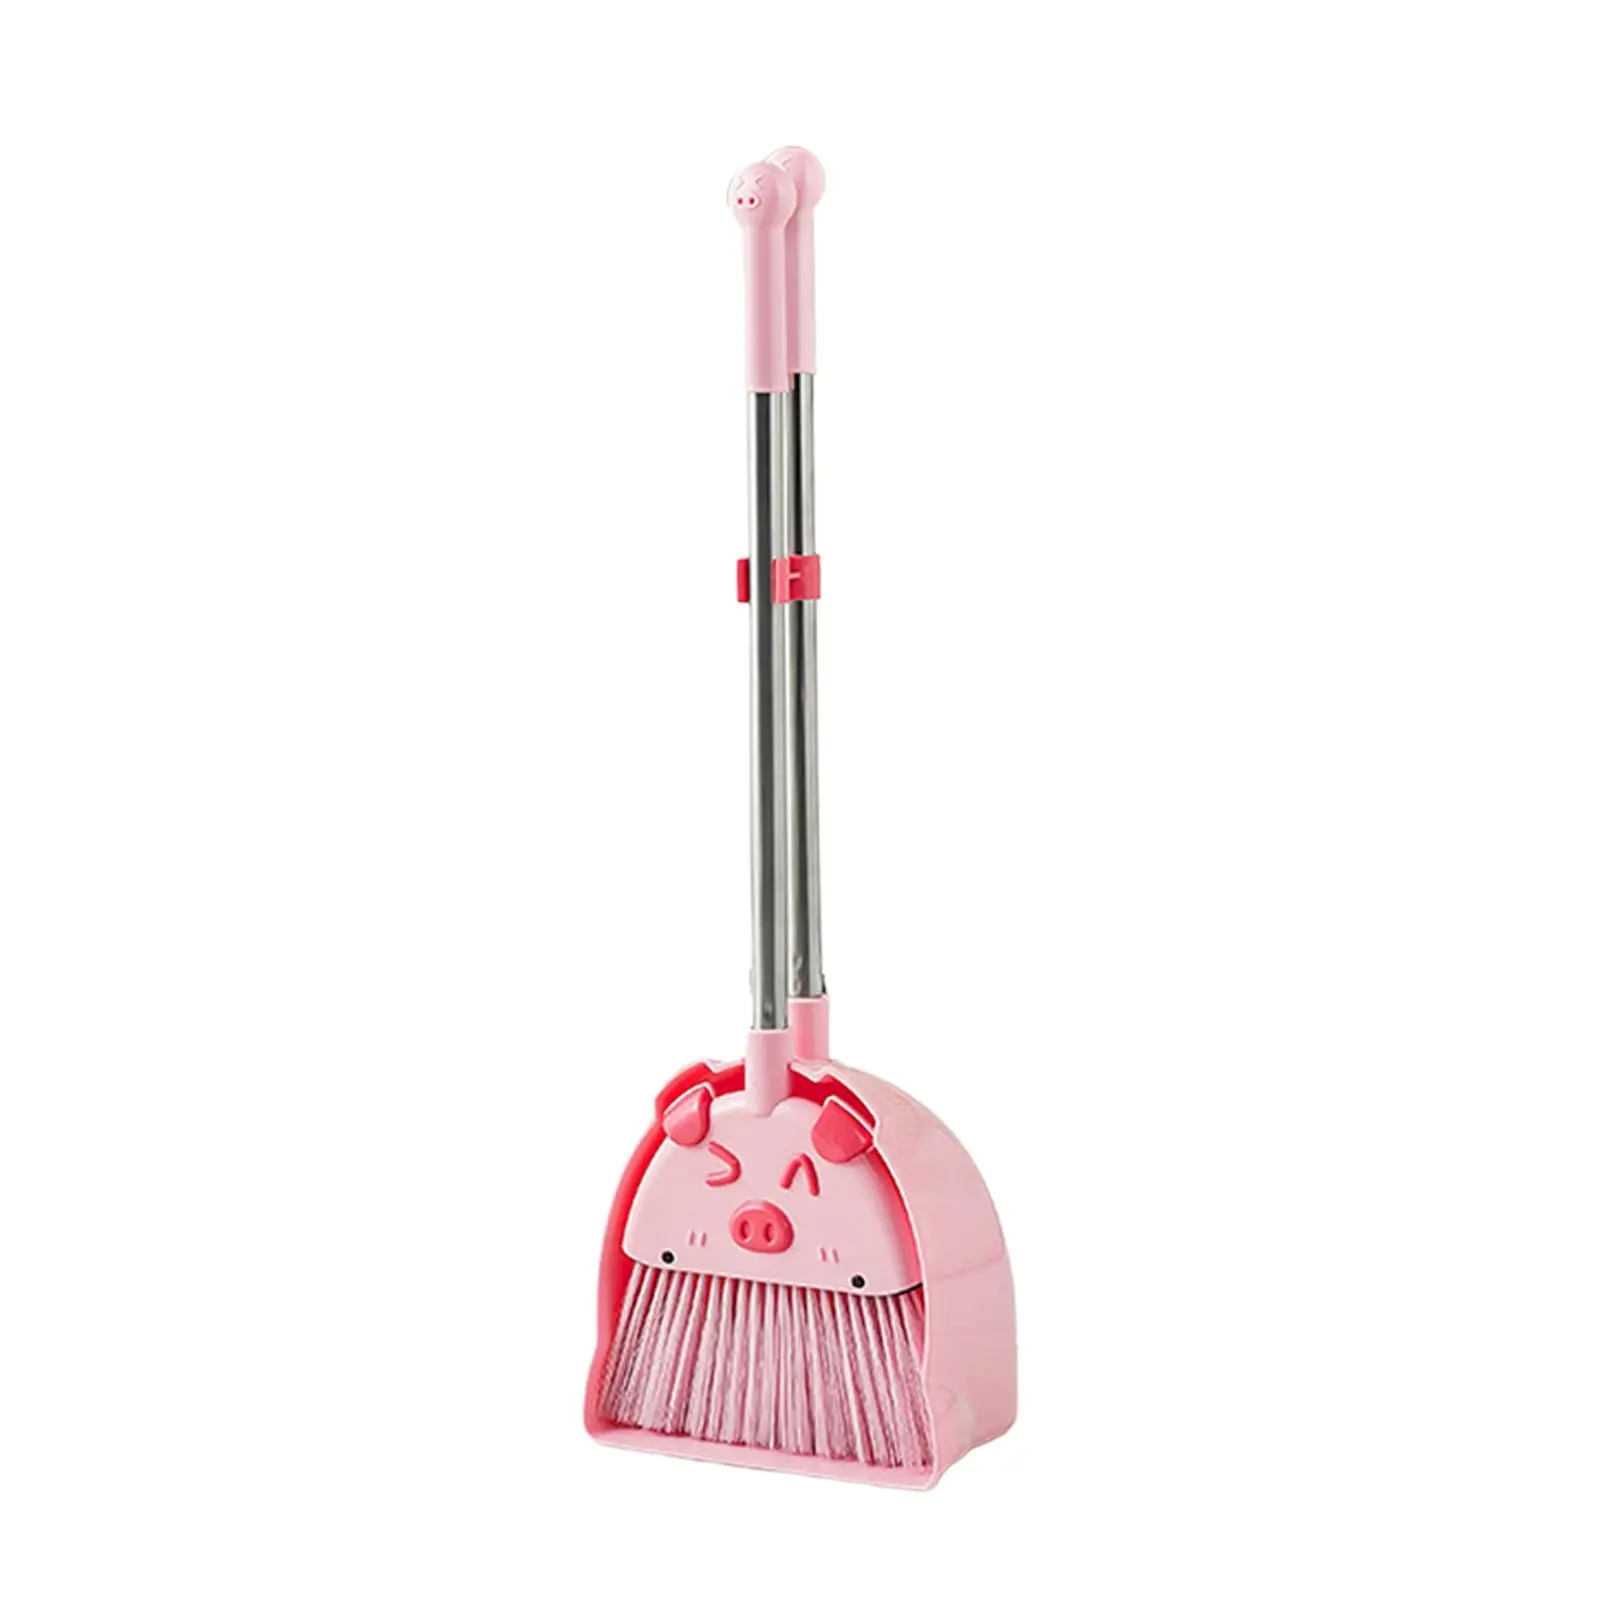 Mini Broom with Dustpan Little Housekeeping Helper Set House Cleaning Gifts Cleaning Sweeping Play Set for Girls Birthday Gifts